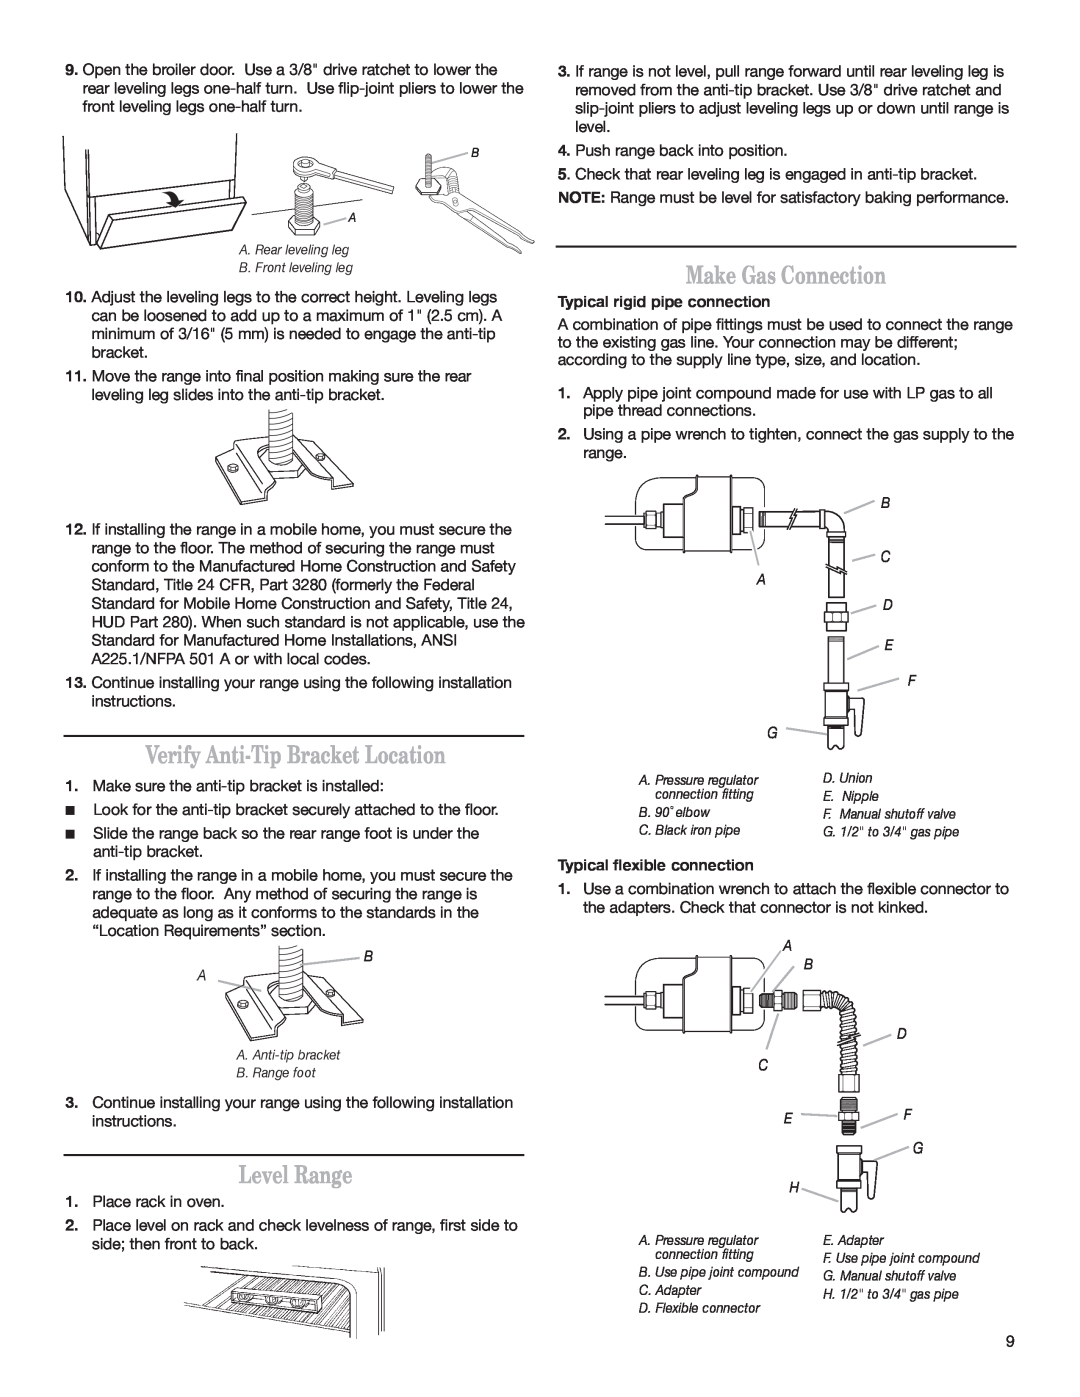 Whirlpool W10153329A Verify Anti-Tip Bracket Location, Level Range, Make Gas Connection, Typical rigid pipe connection 